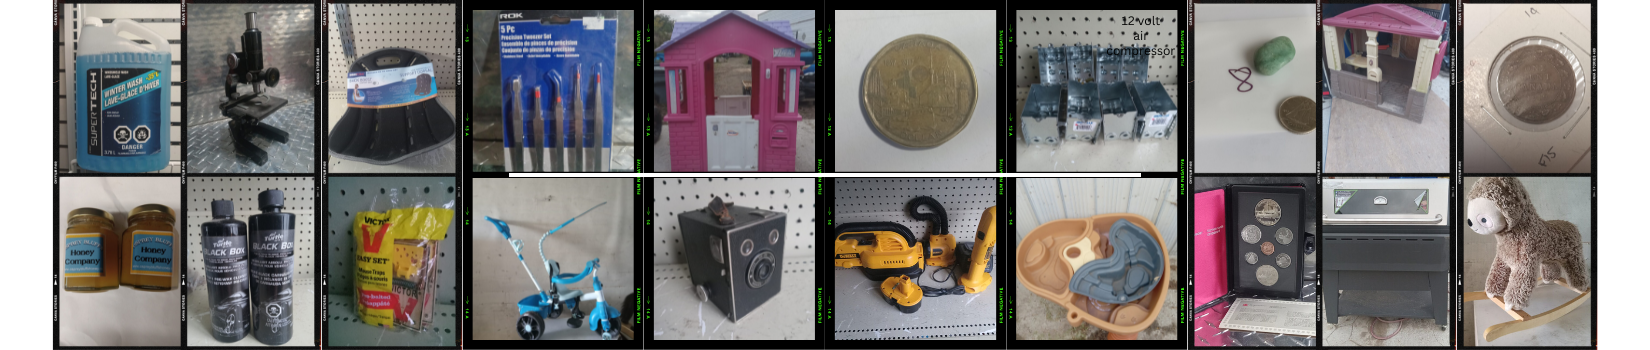 Zehr's Sales October 26th Coins, Collectibles and Much More Online Auction